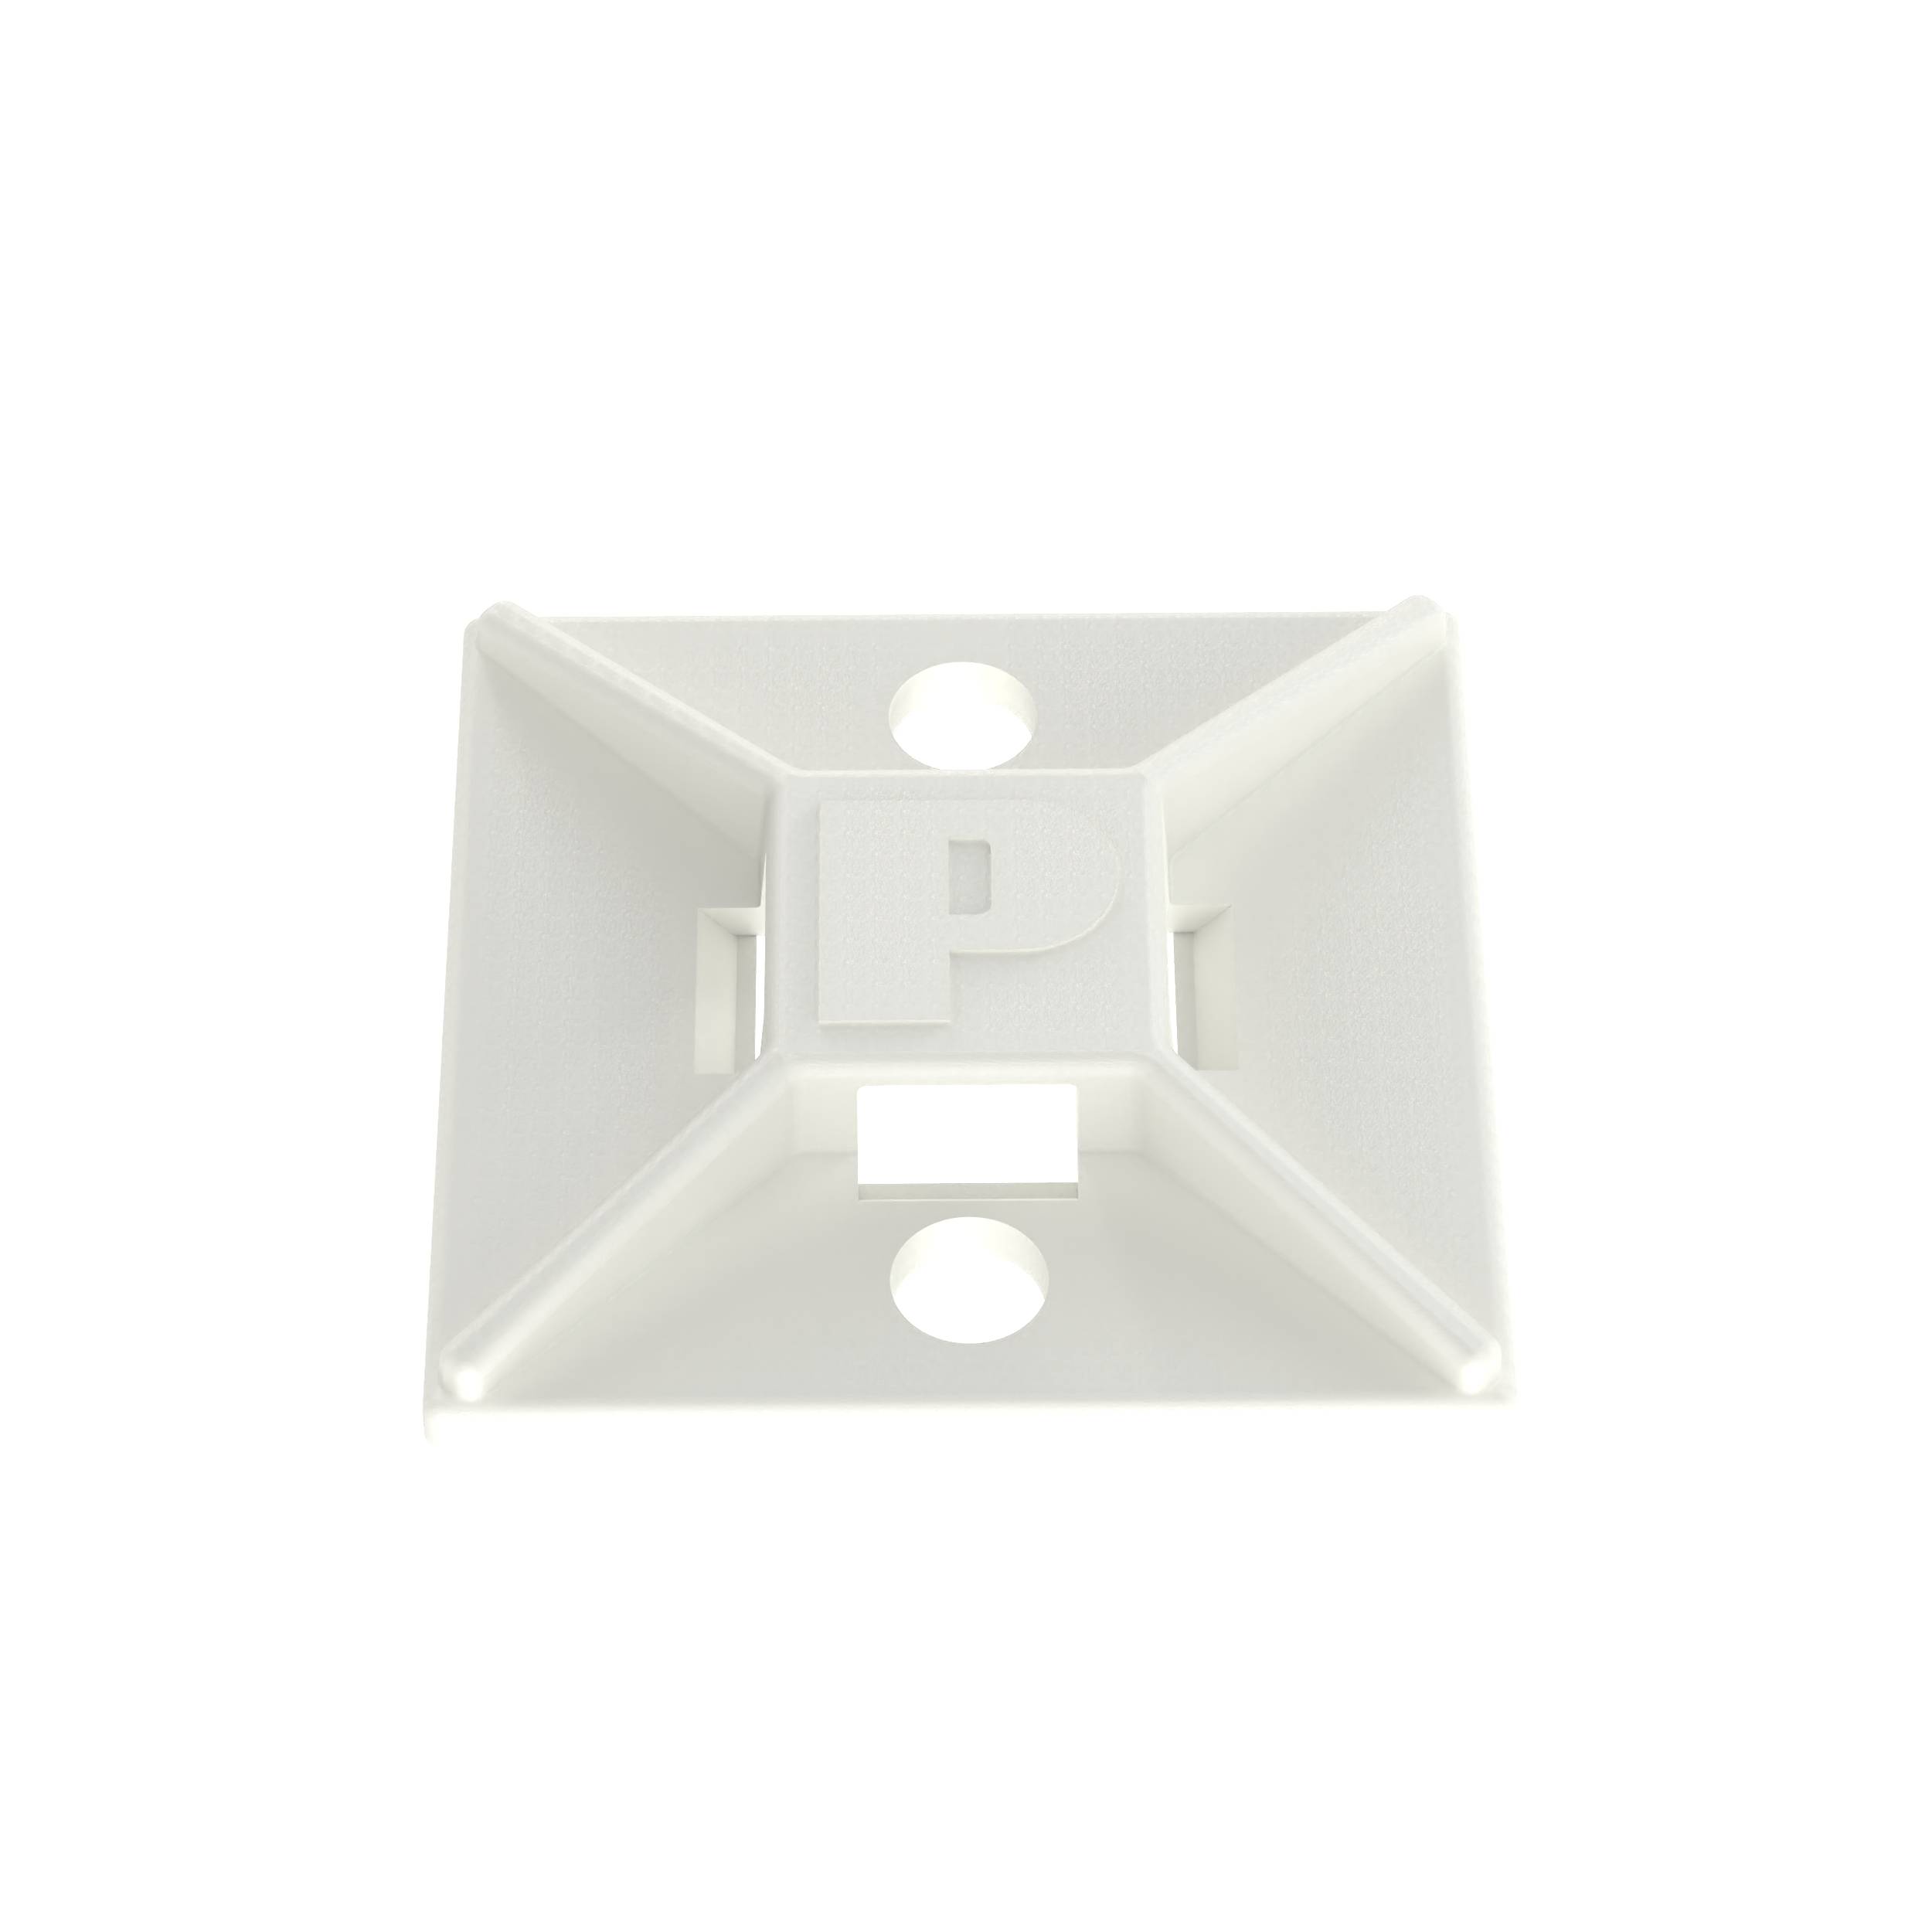 Panduit® ABM112-AT-D Weather-Resistant Cable Tie Mount, 4-Way, Acrylic Adhesive Tape Mount, 0.19 in W Tie, Nylon 6.6, White